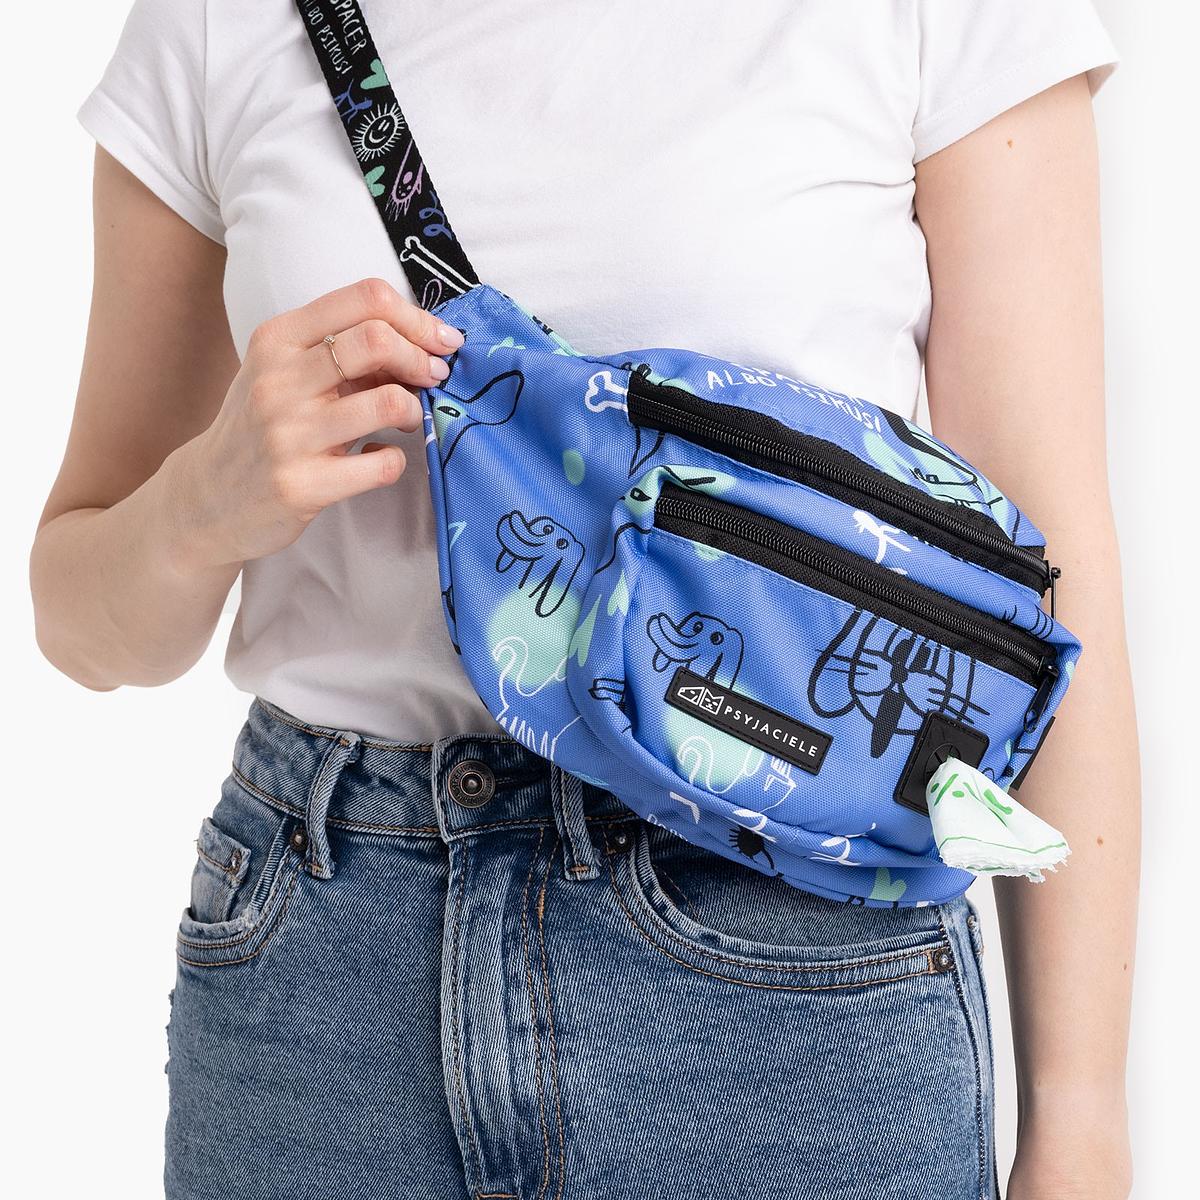 Fanny pack with patterned belt "Walk or treat"